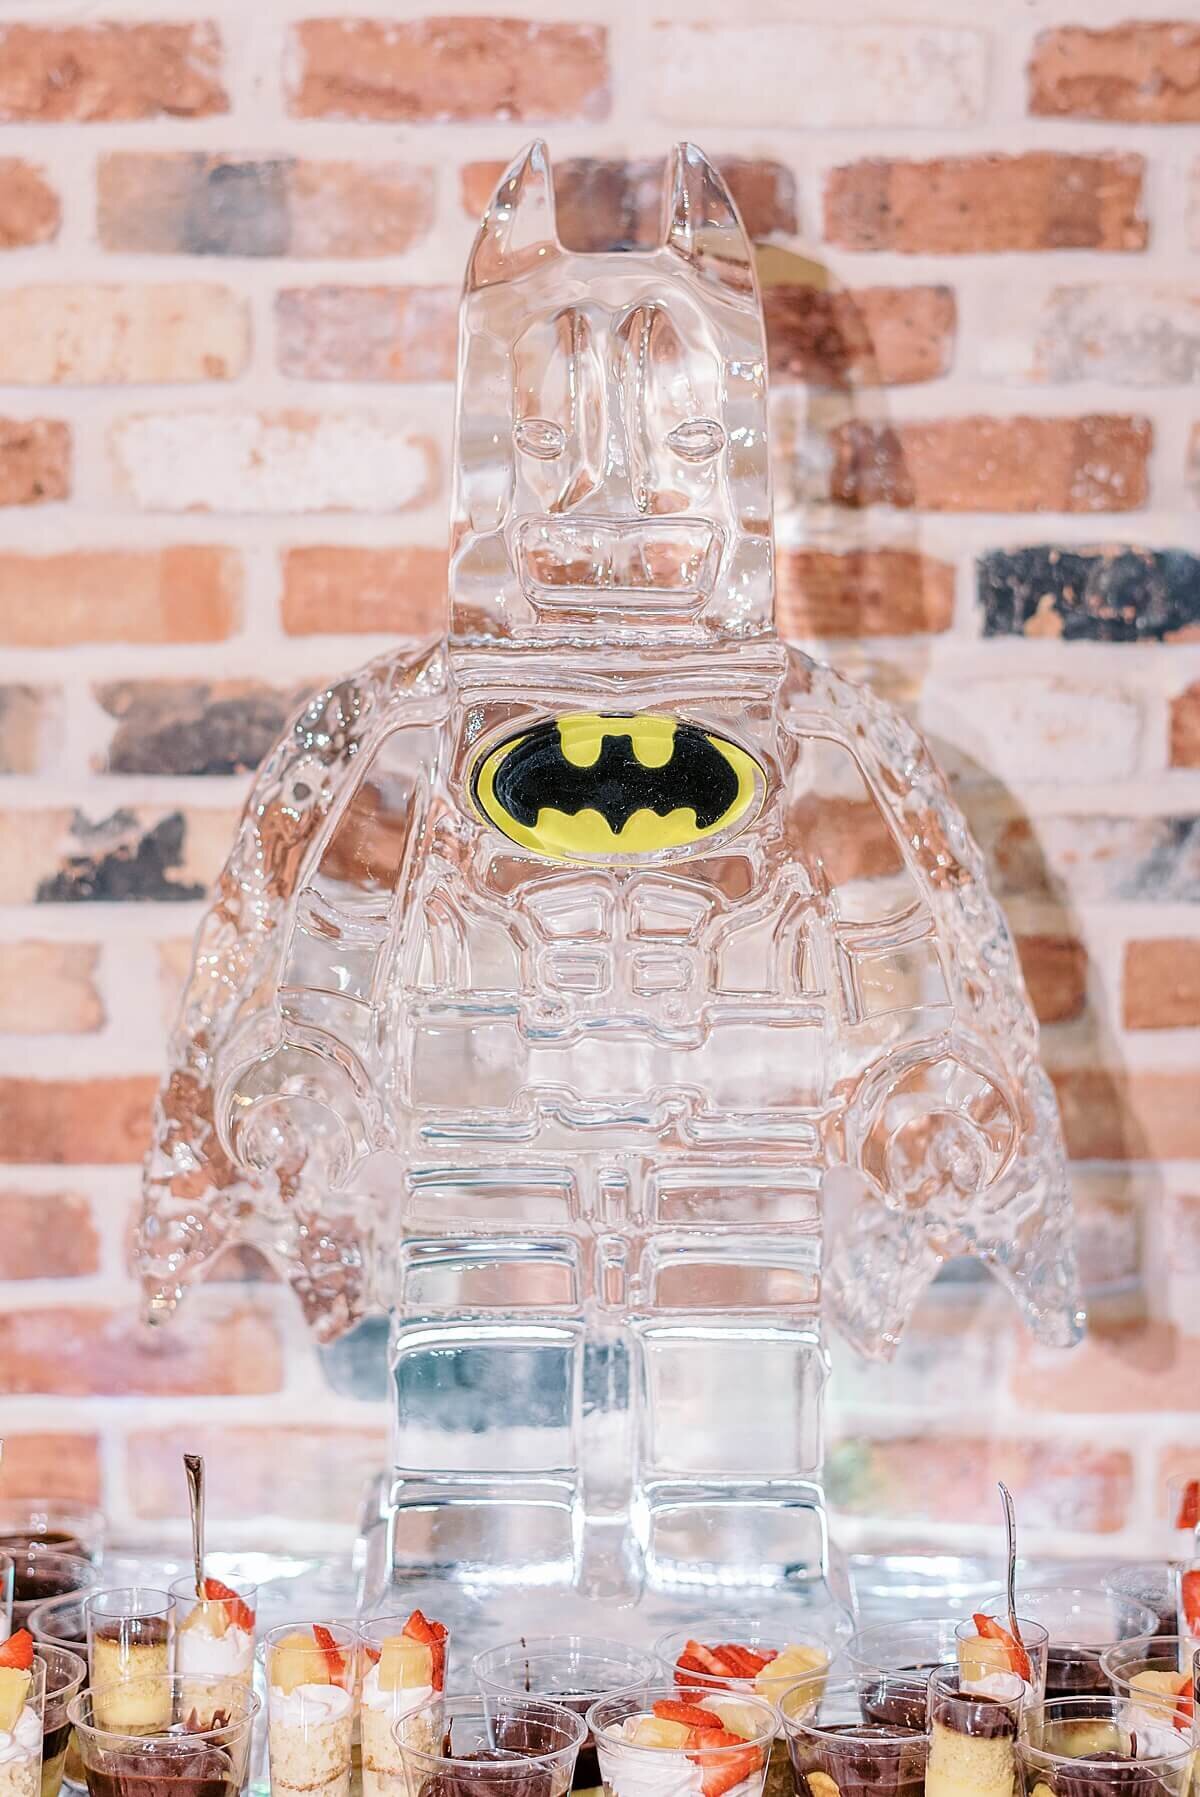 Batman Ice Sculpture  at the Weinberg at Wixon Valley in Bryan Texas photographed by Alicia Yarrish Photography